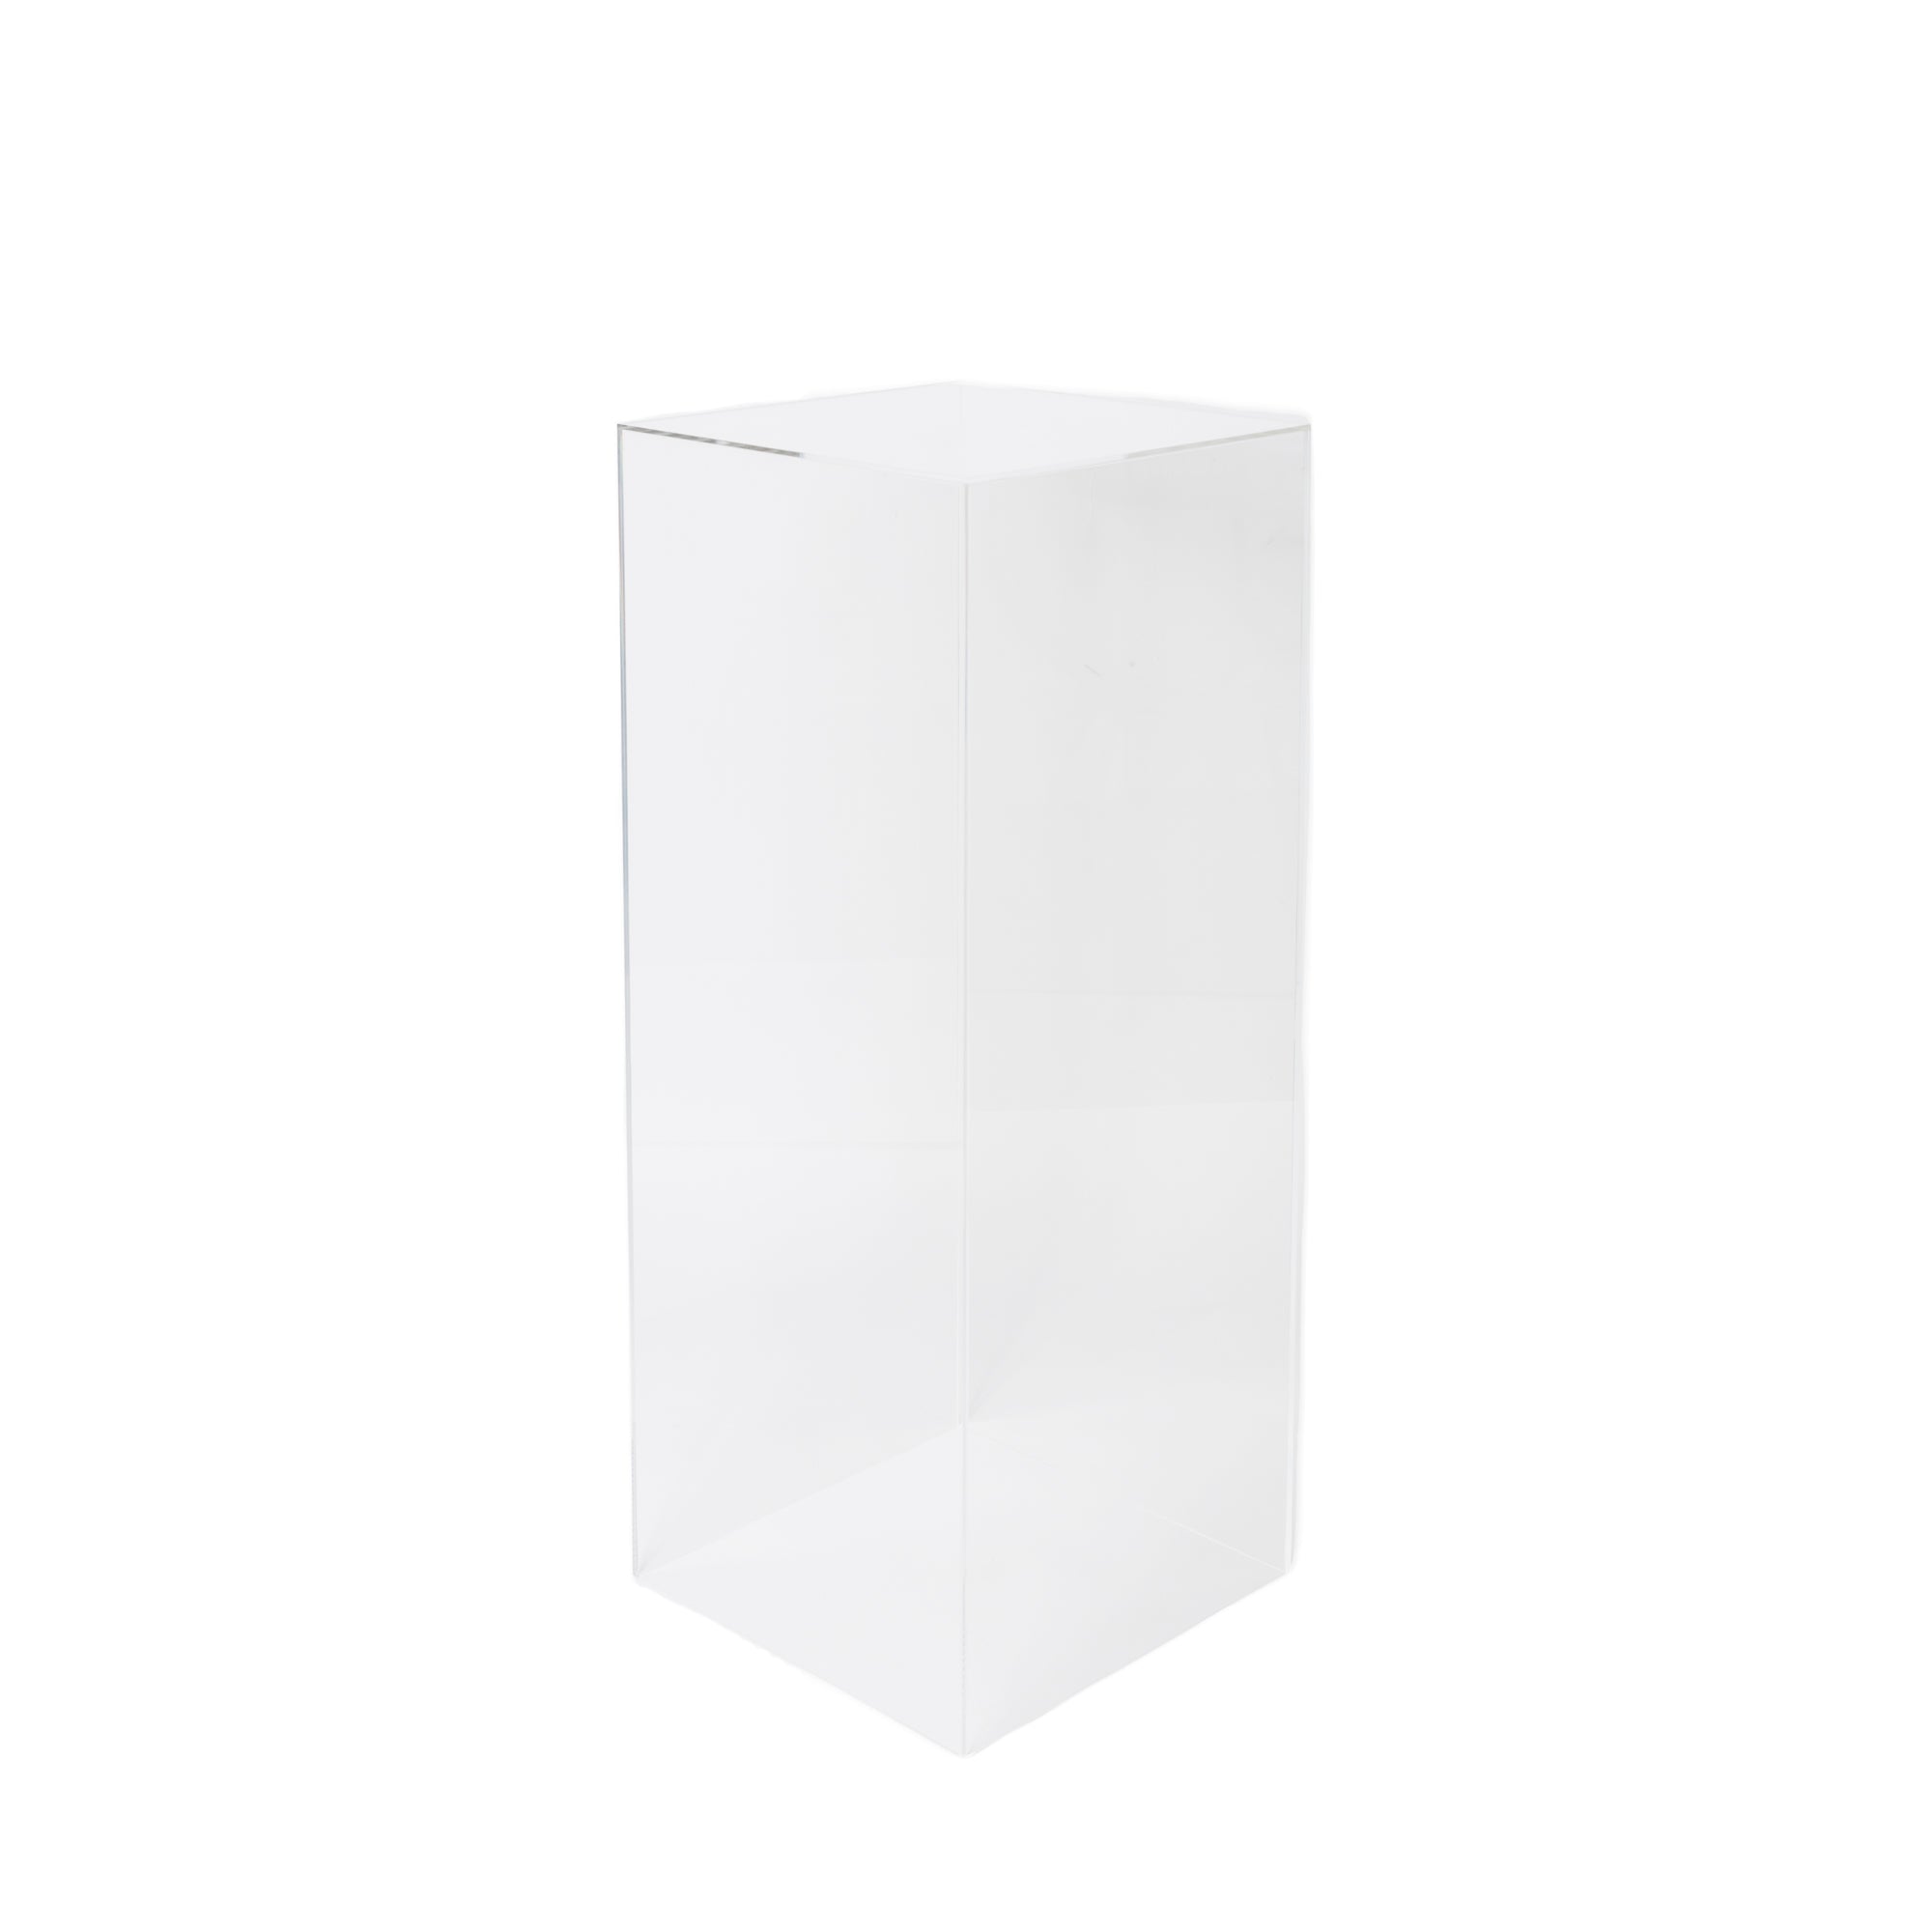 Transparent Plinths Available For Hire by For Love & Living Gold Coast